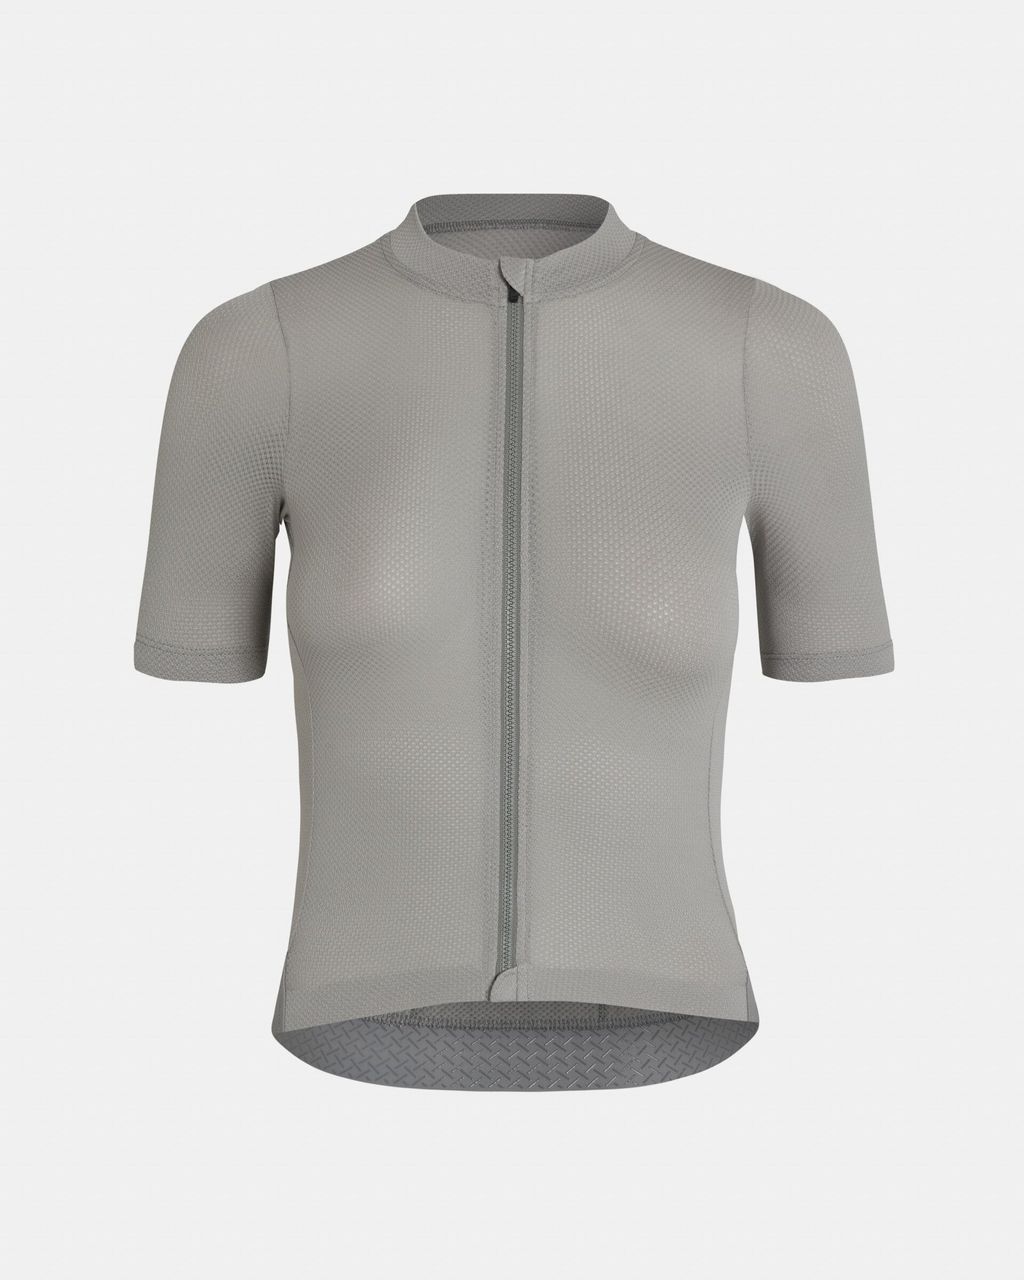 Womens_Solitude-Mesh-SS-Jersey_Light-Grey_Front-pdp-page